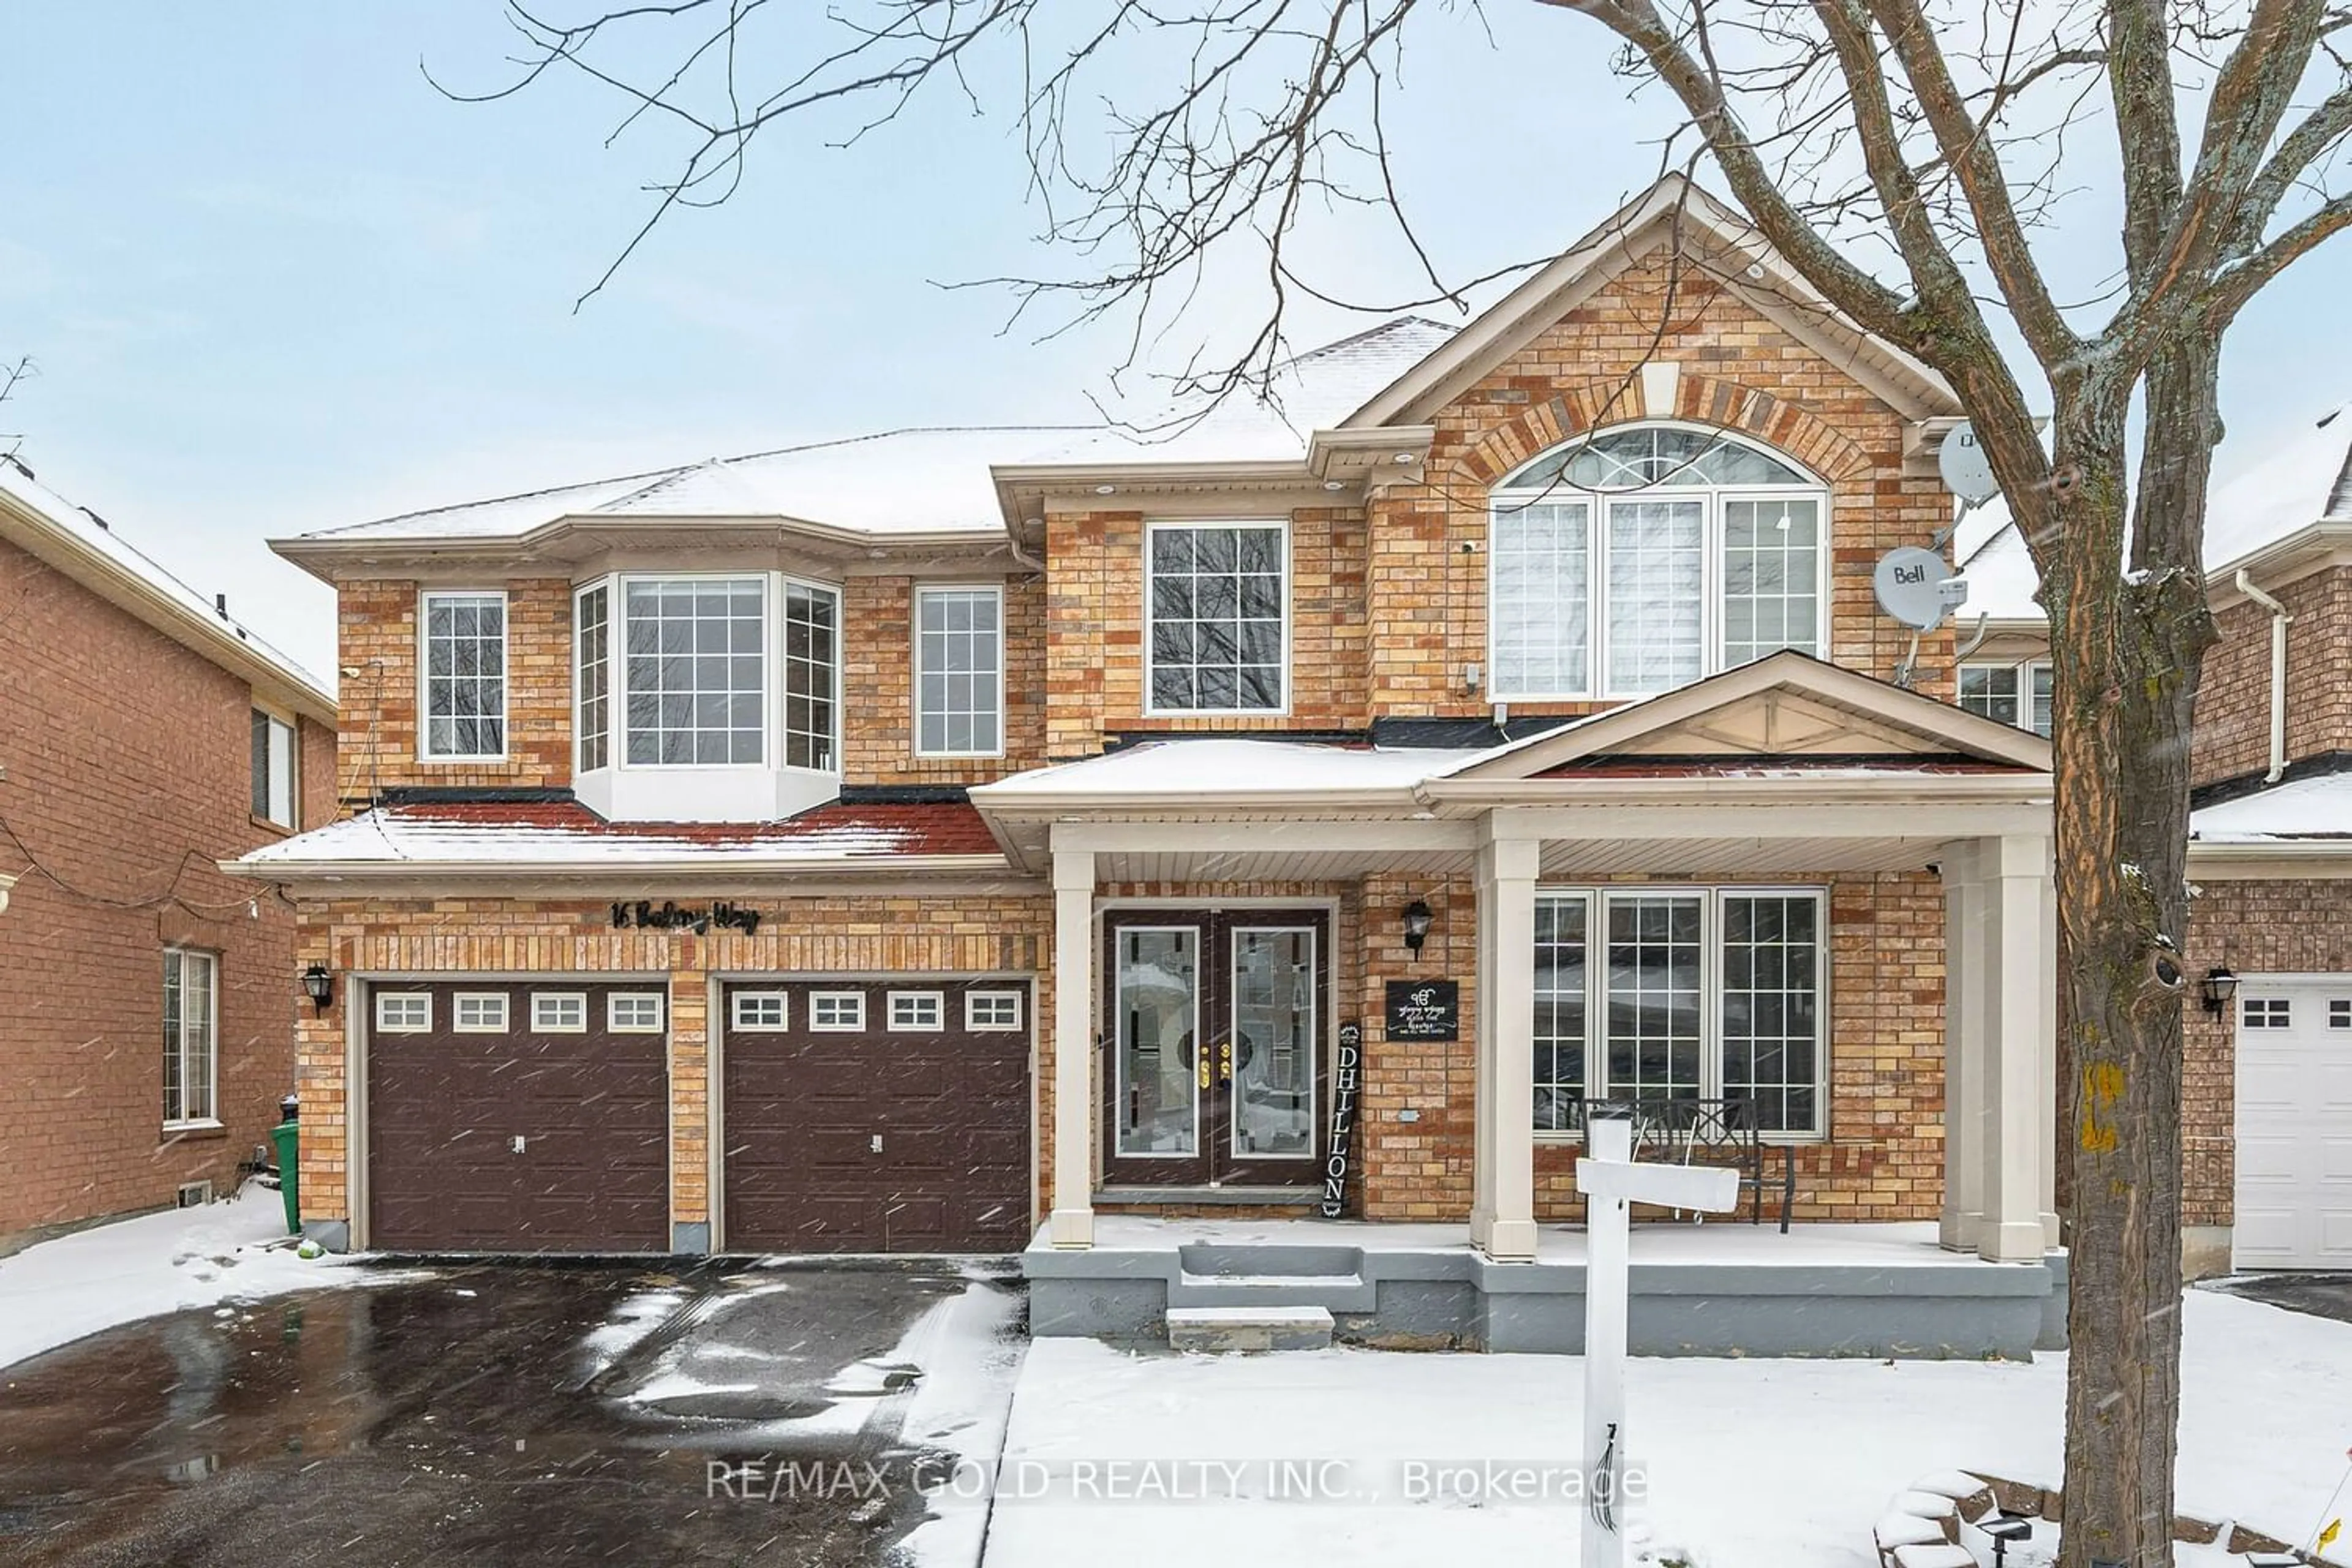 Home with brick exterior material for 16 Balmy Way, Brampton Ontario L6P 1L3